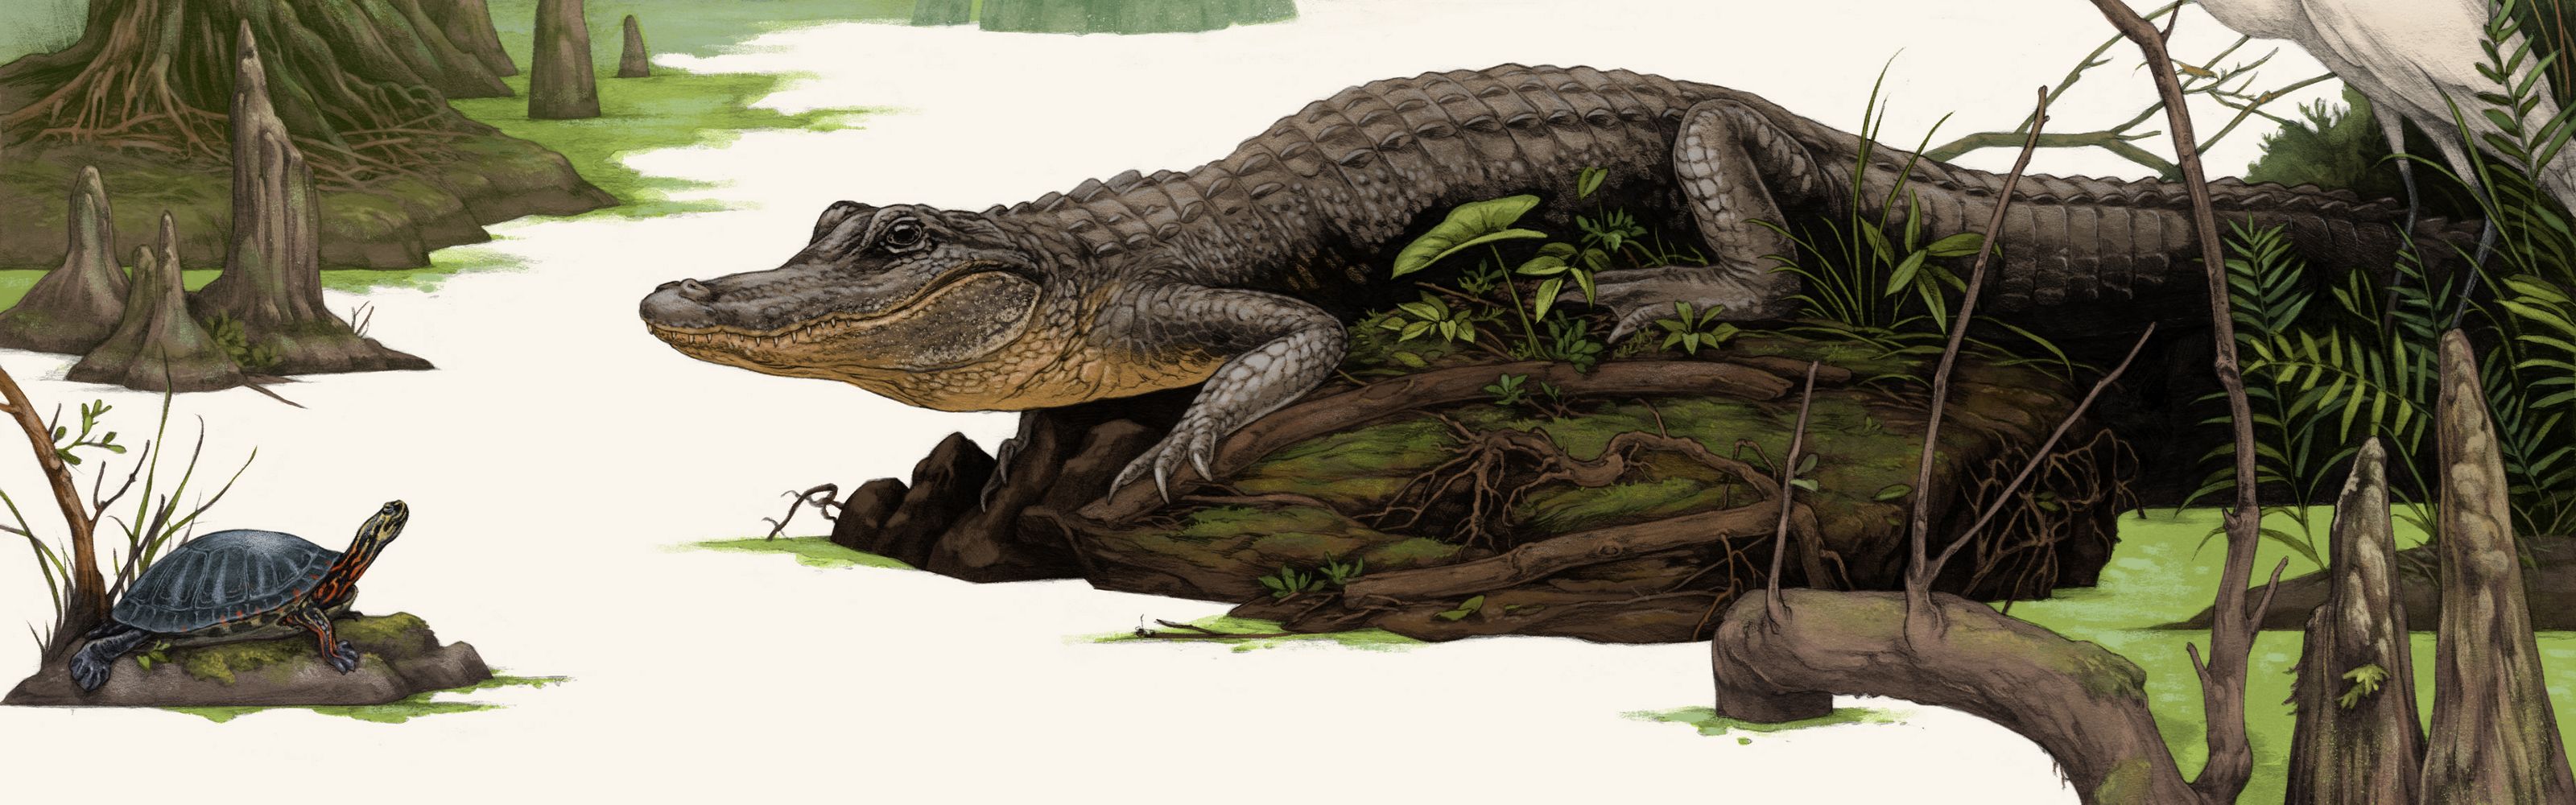 an illustration shows the american alligator in a wetland.